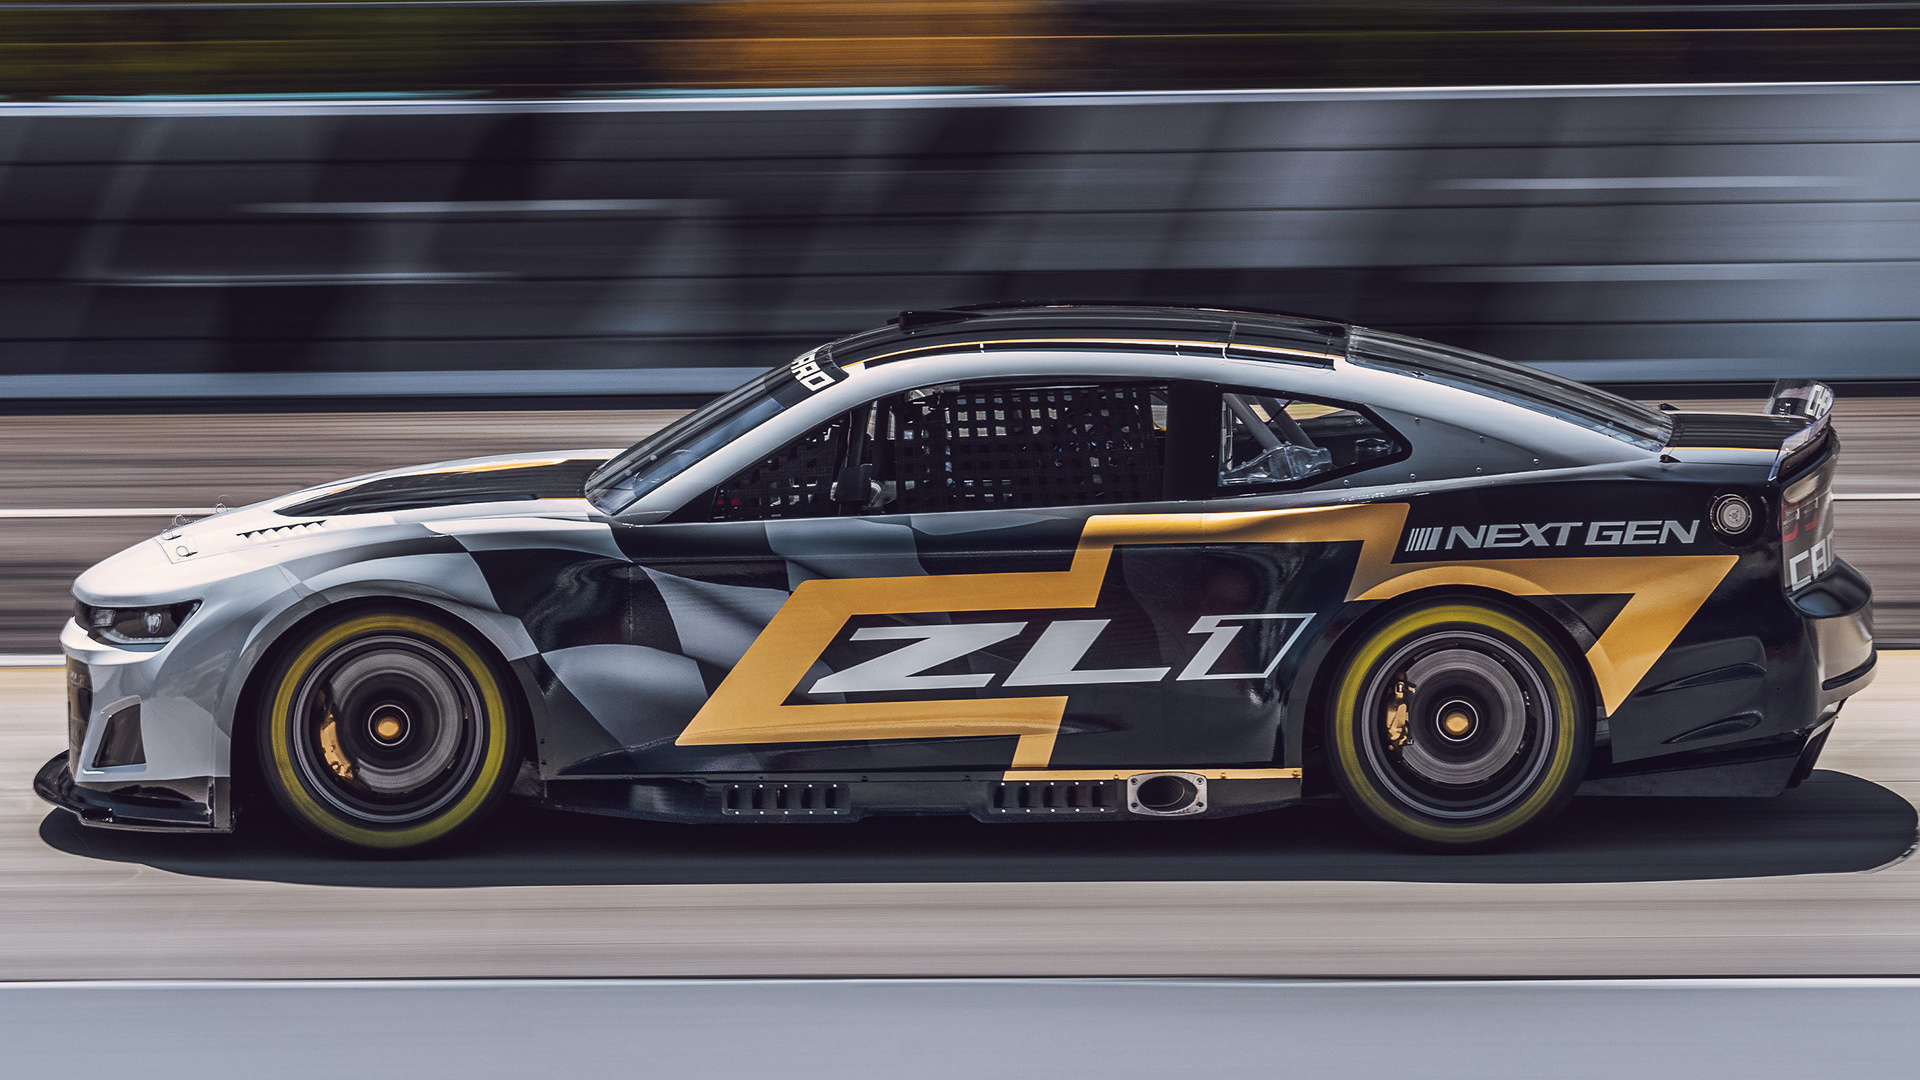 2022 Chevrolet Camaro ZL1 NASCAR Race Car - Wallpapers and HD Images | Car  Pixel